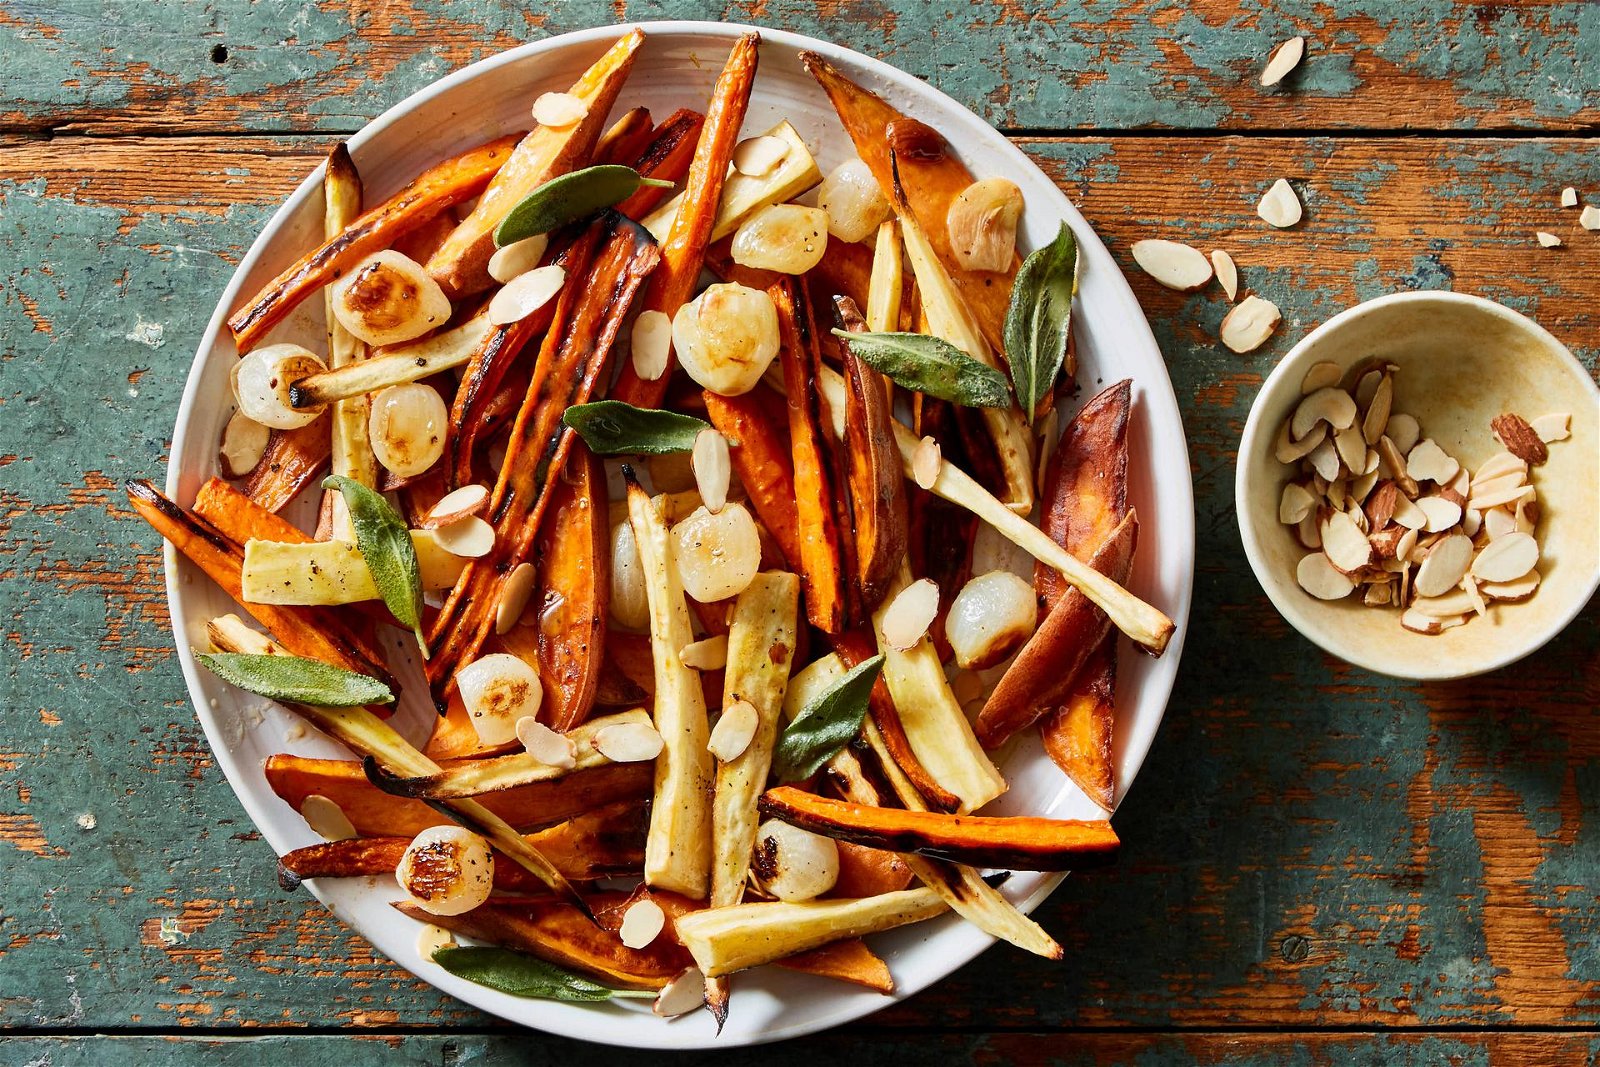 Roasted Root Vegetables with Brown Butter, Herbs & Almonds